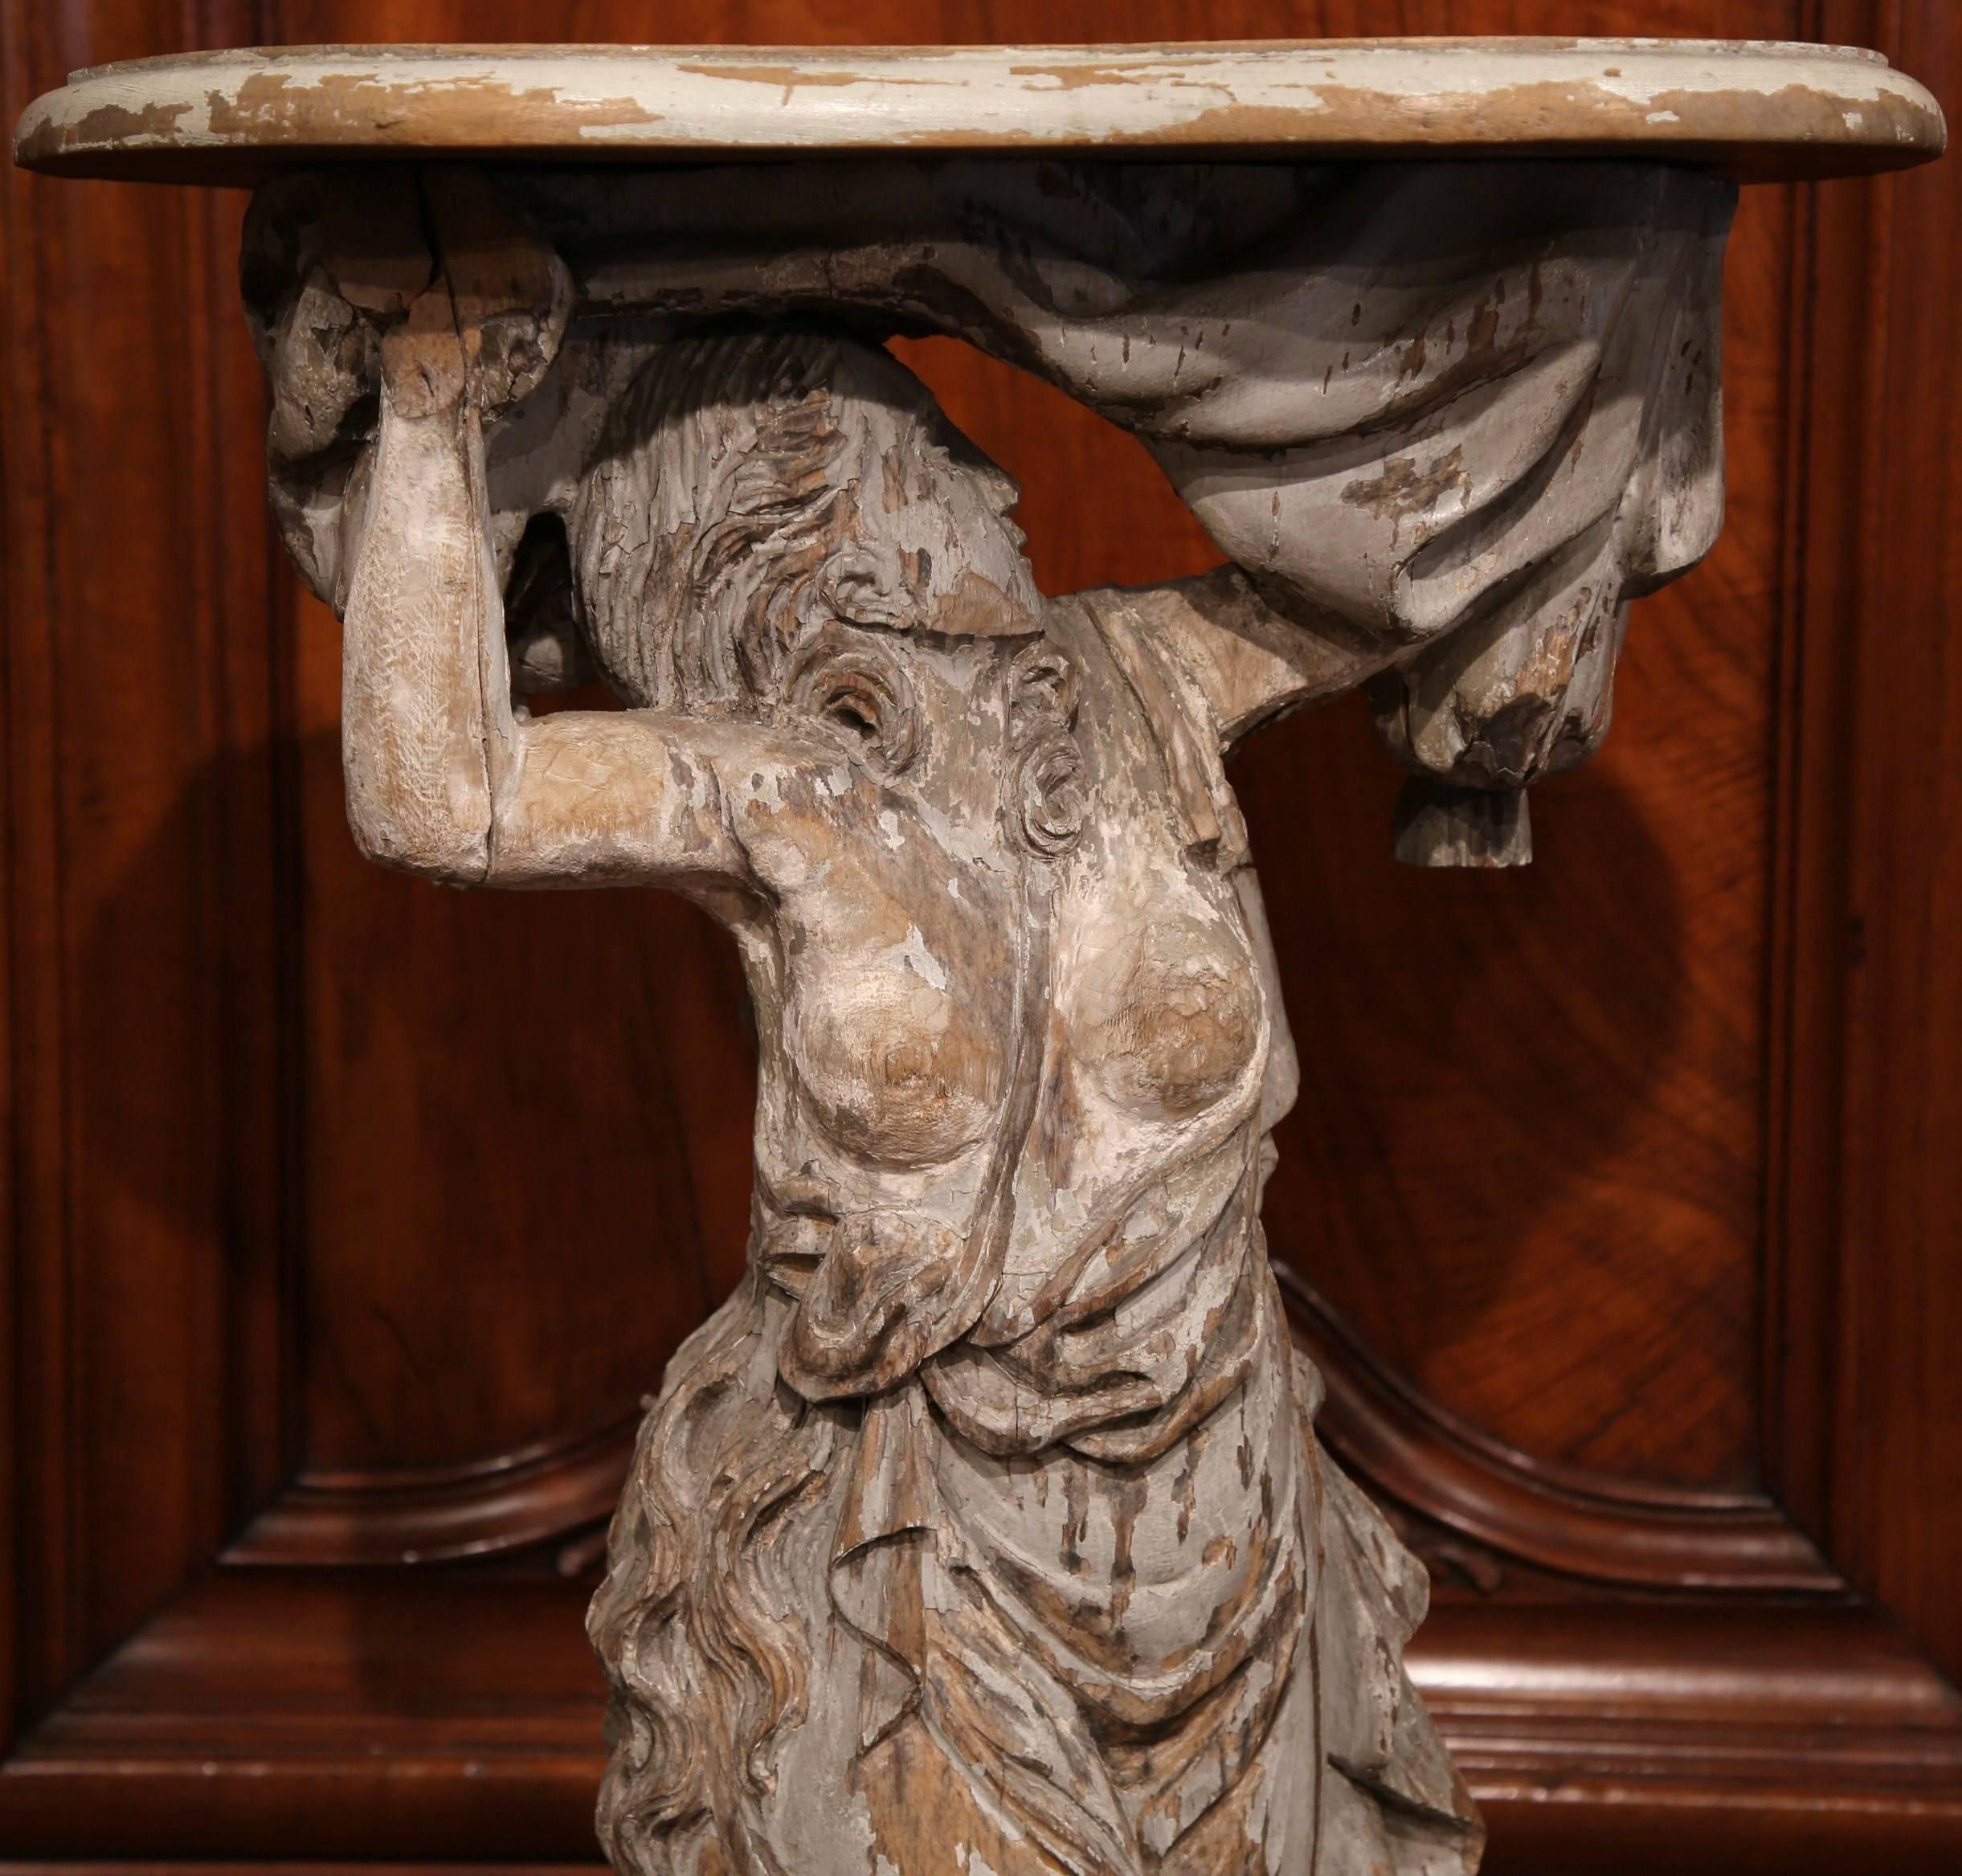 This exquisite, antique figure was carved in France, circa 1750. The sculpture features a neoclassical Grecian woman wearing Classic robes and holding a tabletop, an element that was added later to convert the sculpture into a pedestal table. The